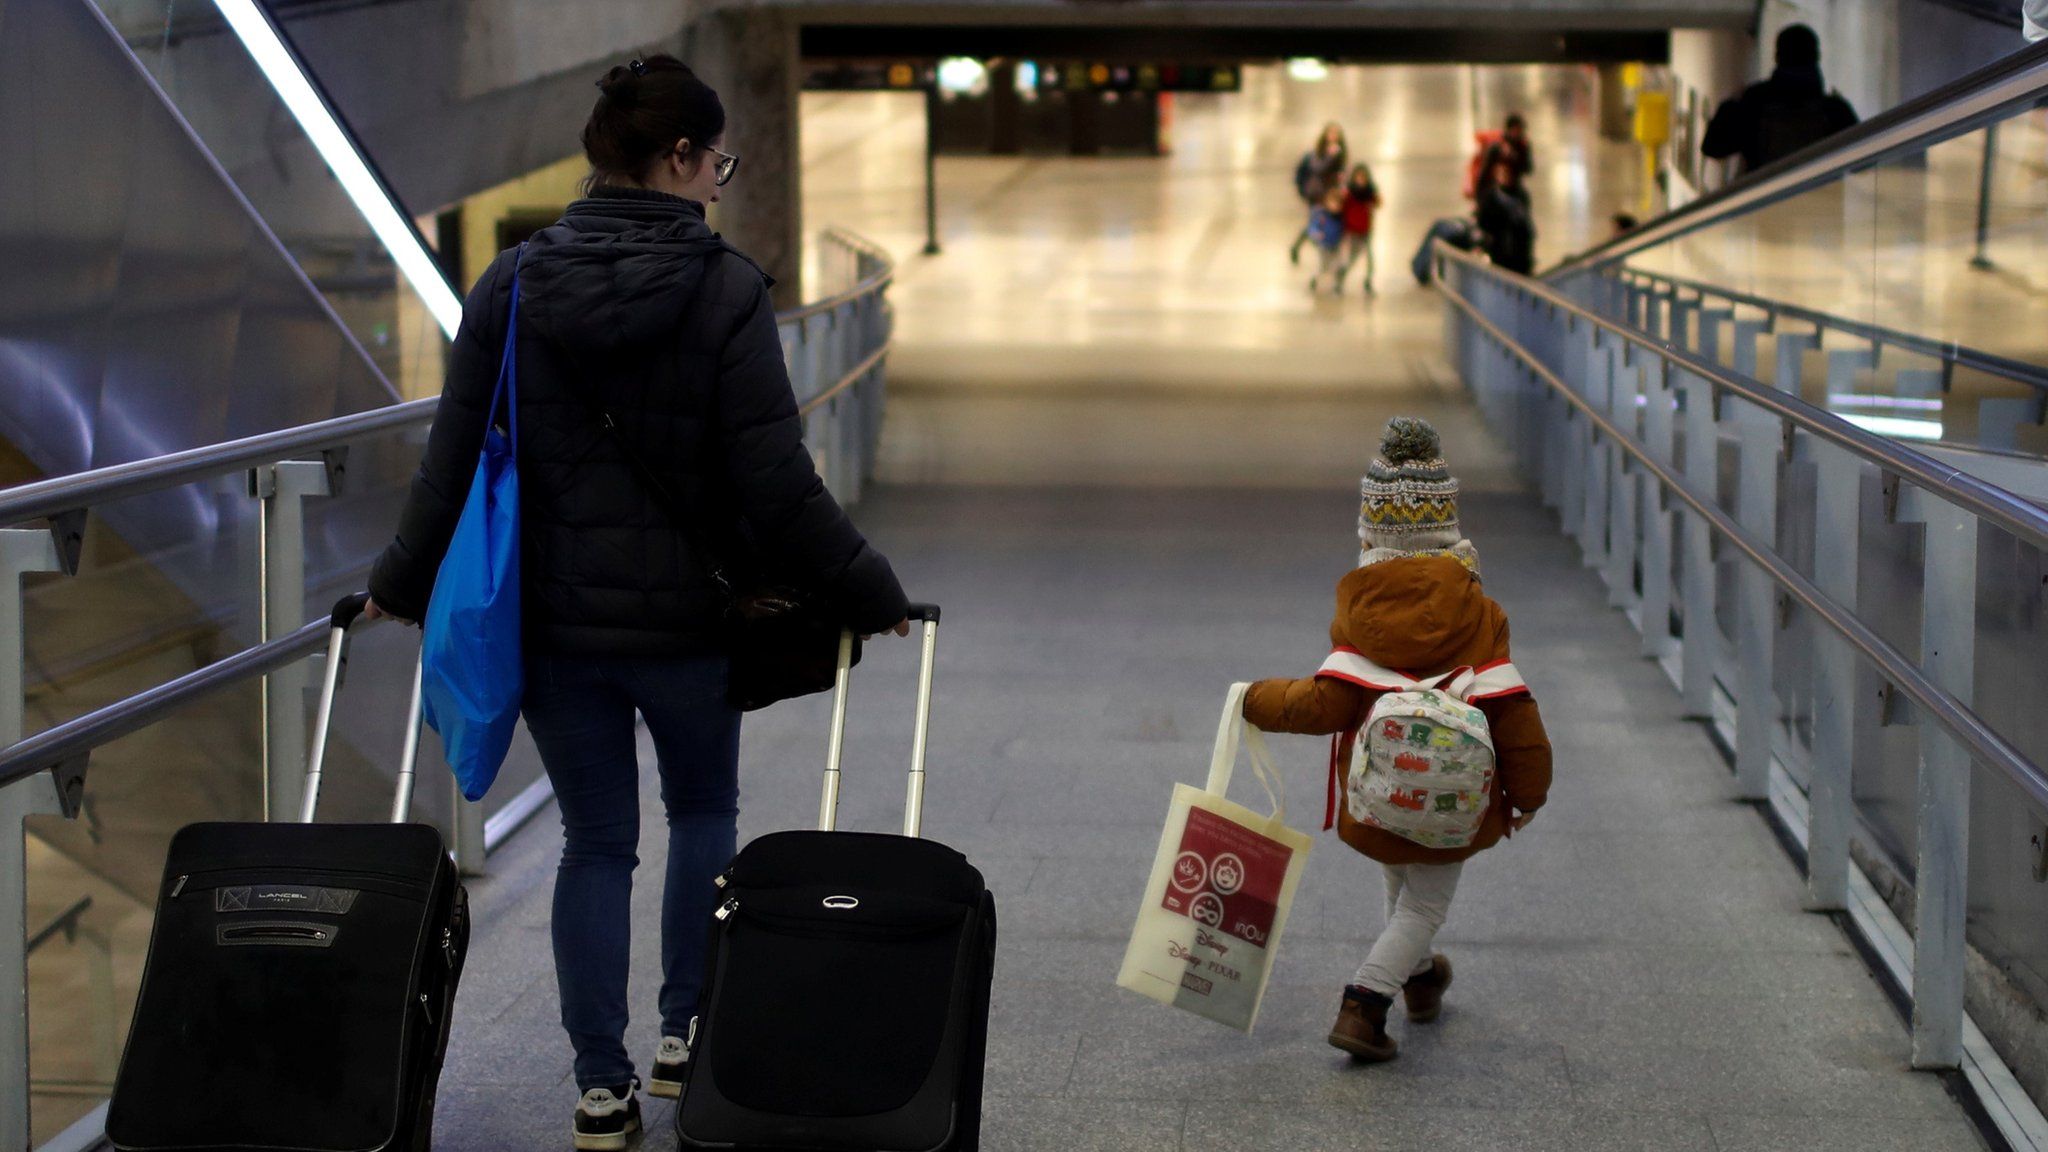 A child using a special train service allowing minors to travel without their parents gets ready to board a train in Paris on 22 December 2019